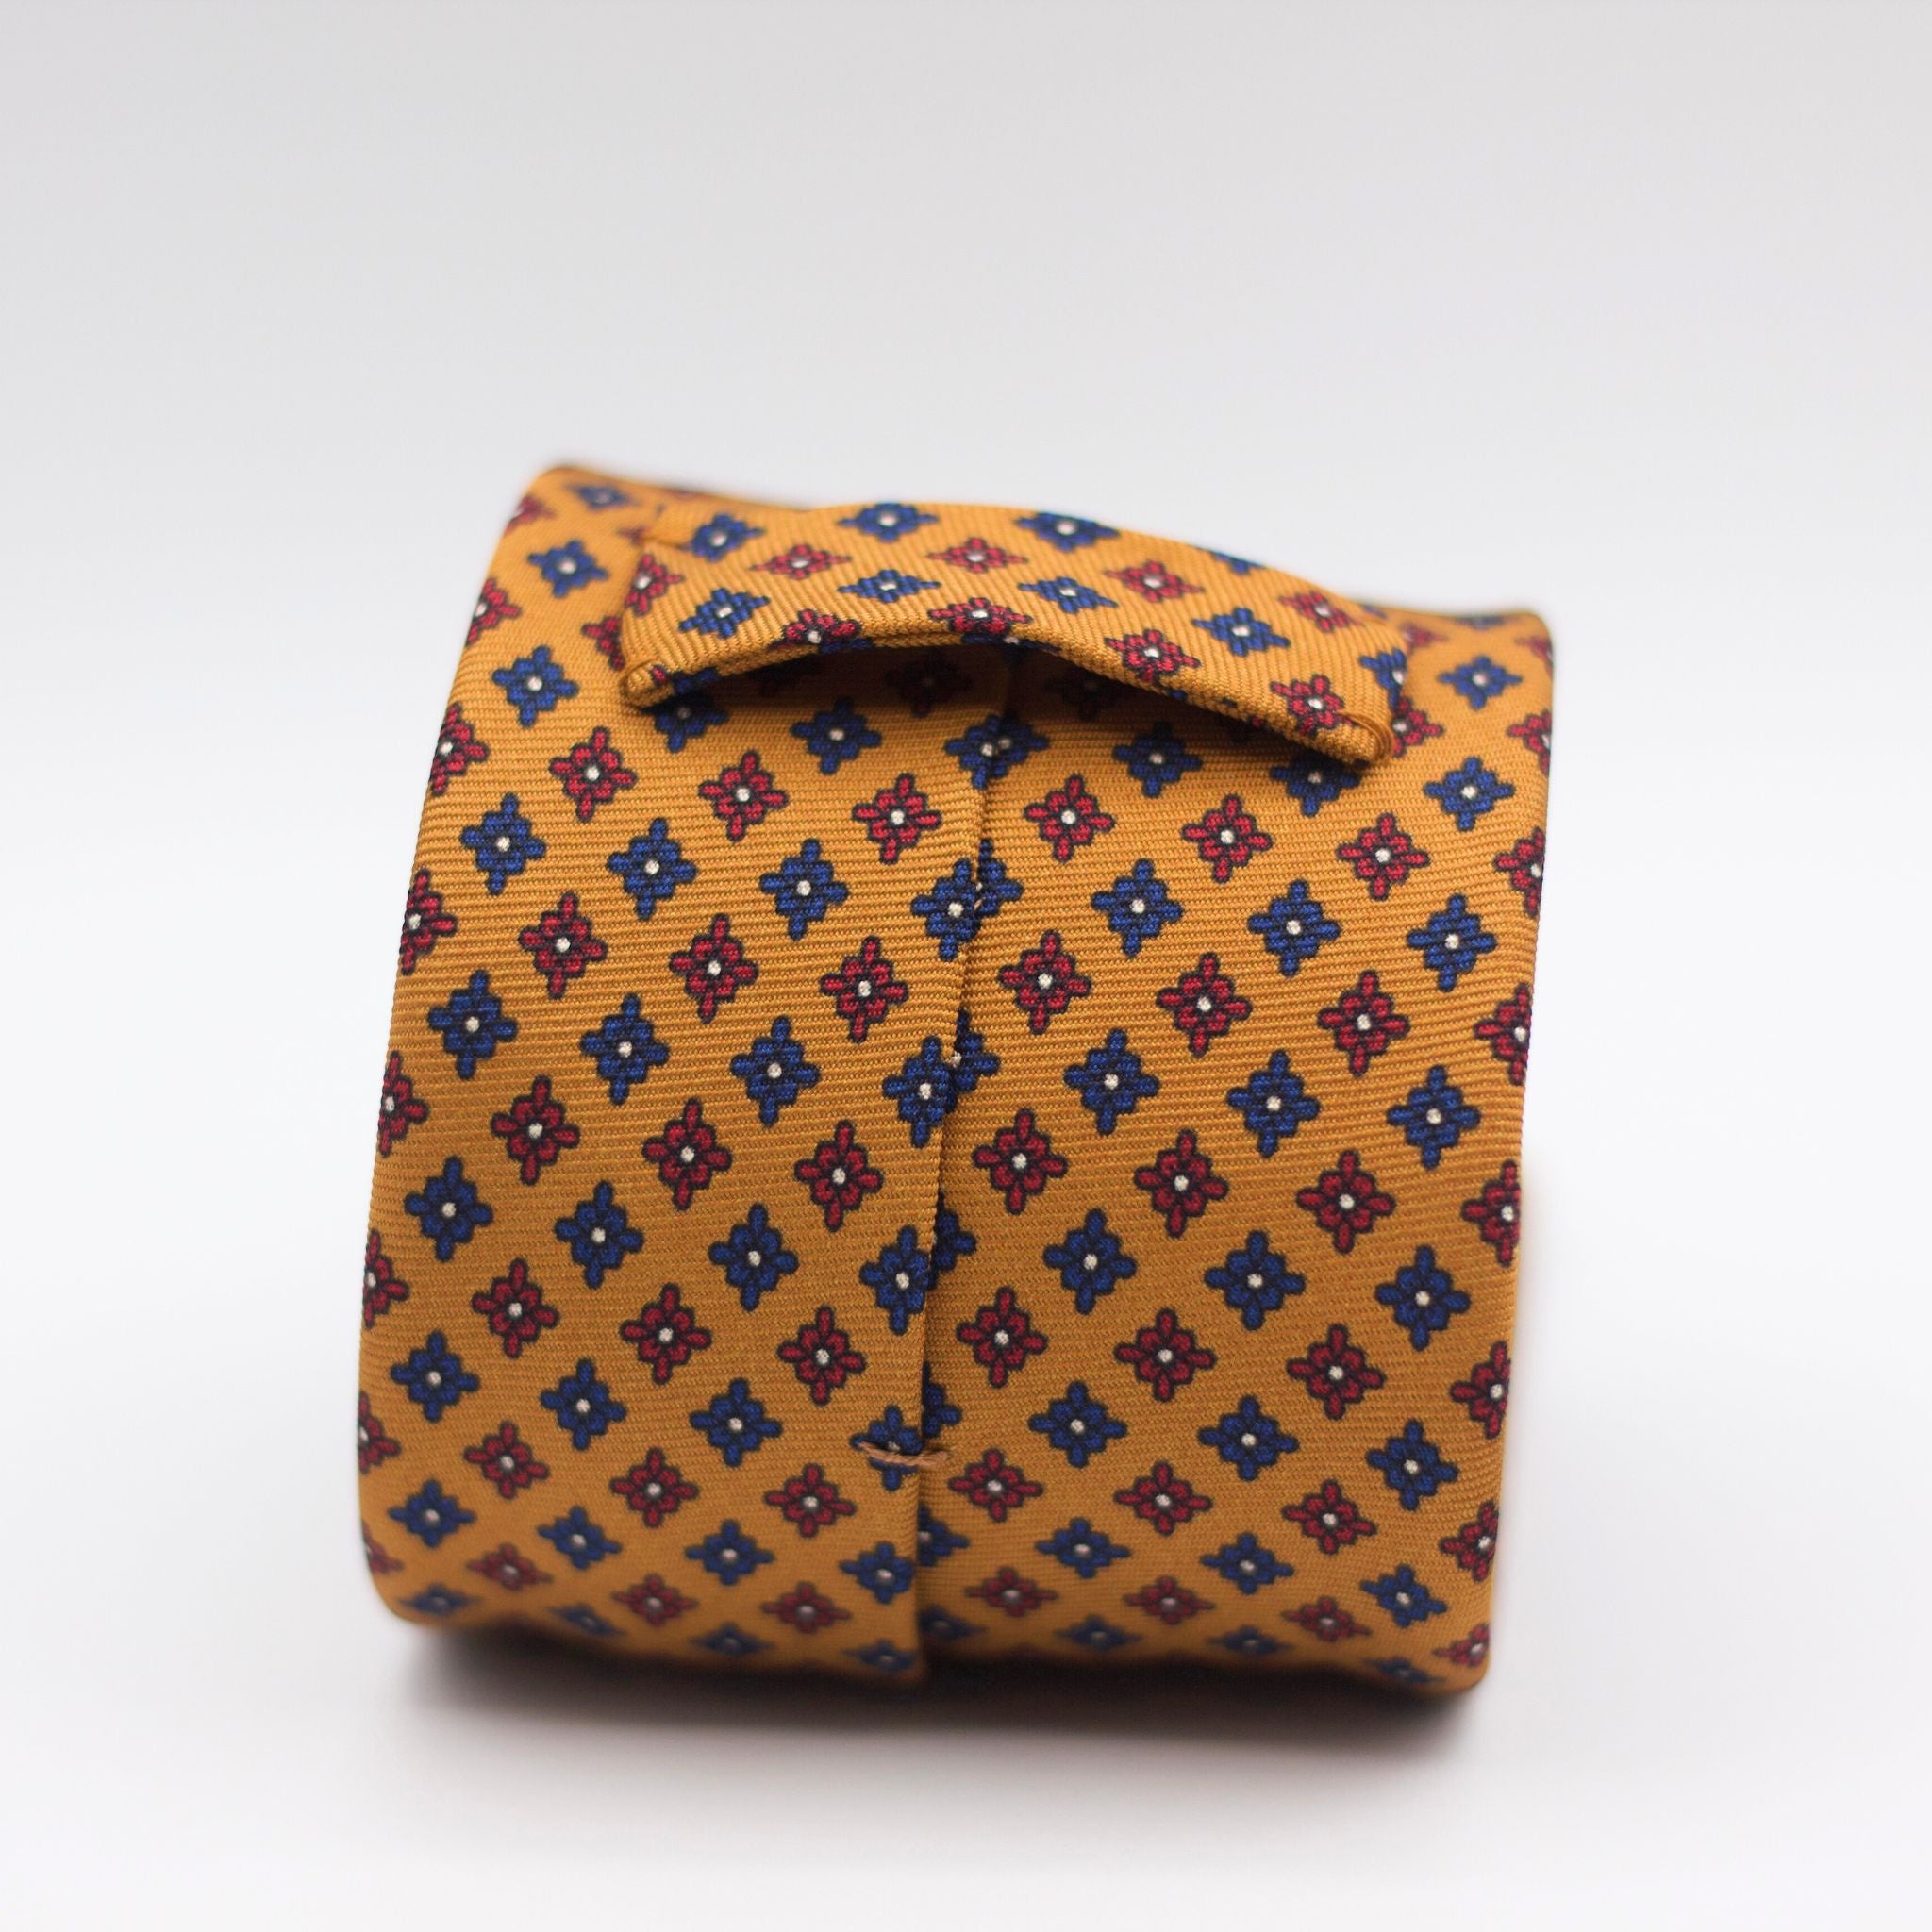 Holliday & Brown for Cruciani & Bella 100% Printed Silk Self-Tipped Orange, Blue and Red motif tie Handmade in Italy 8 cm x 150 cm